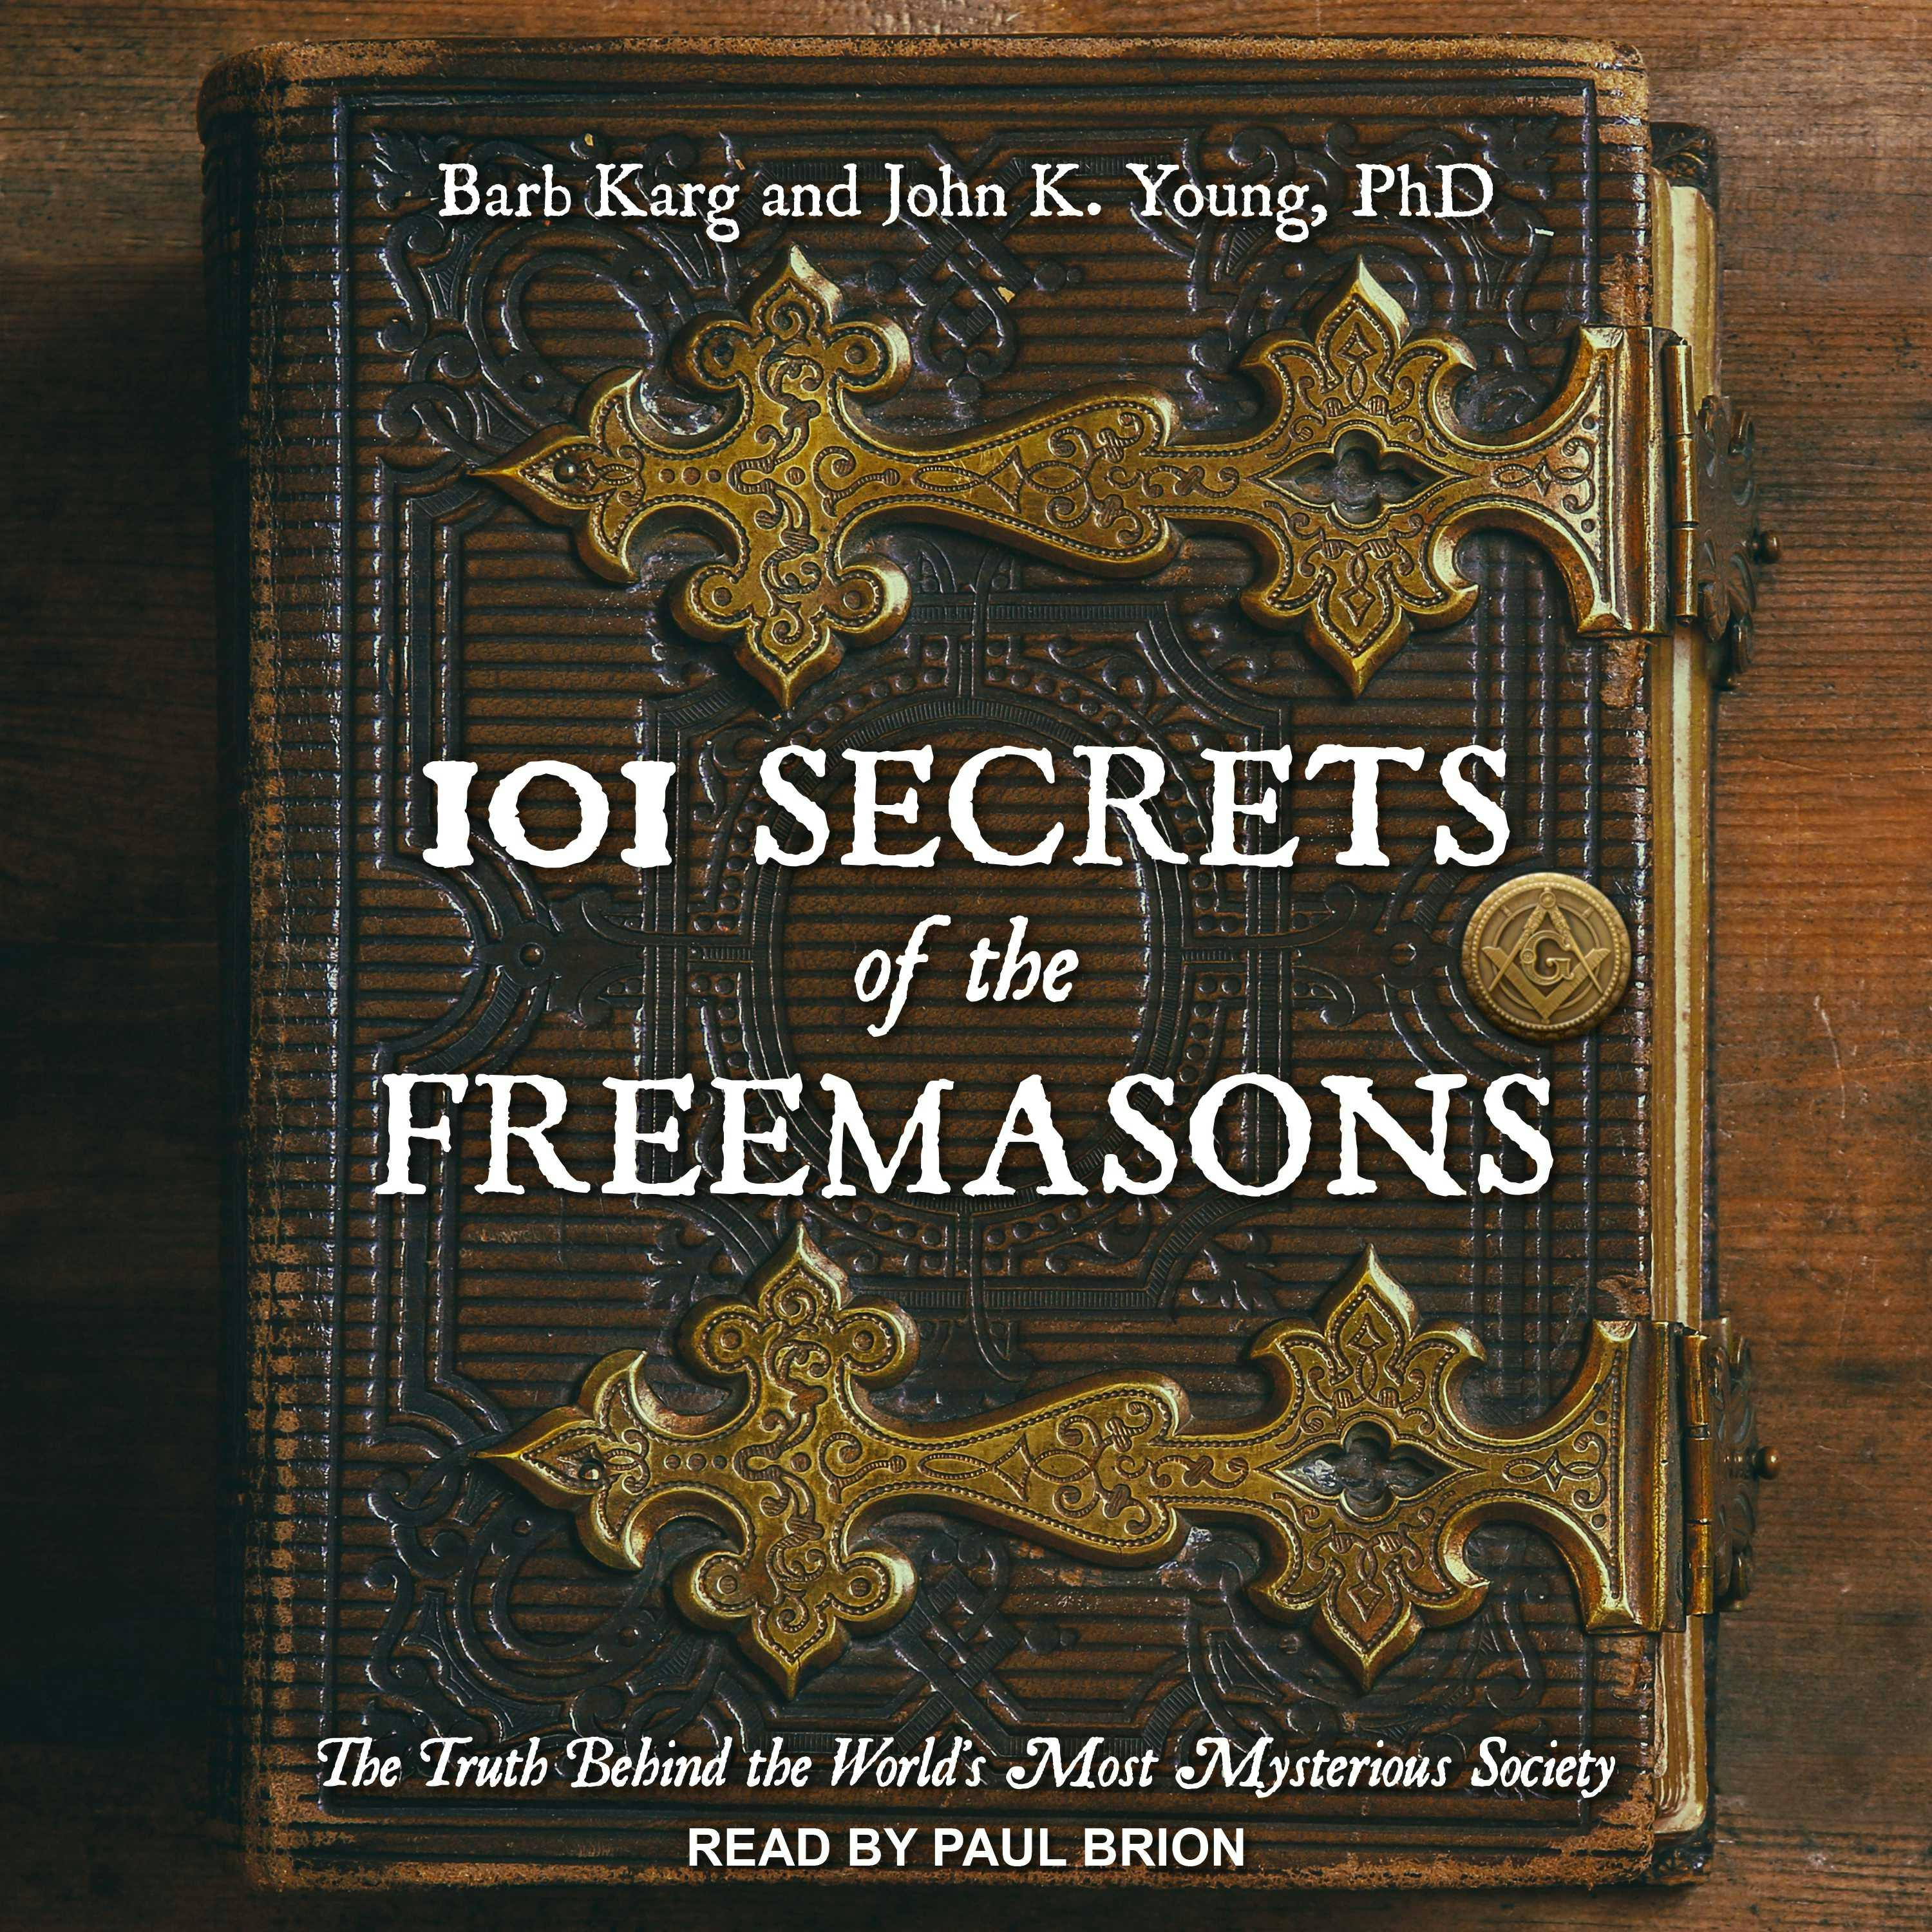 101 Secrets of the Freemasons: The Truth Behind the World's Most Mysterious Society - Barb Karg, PhD